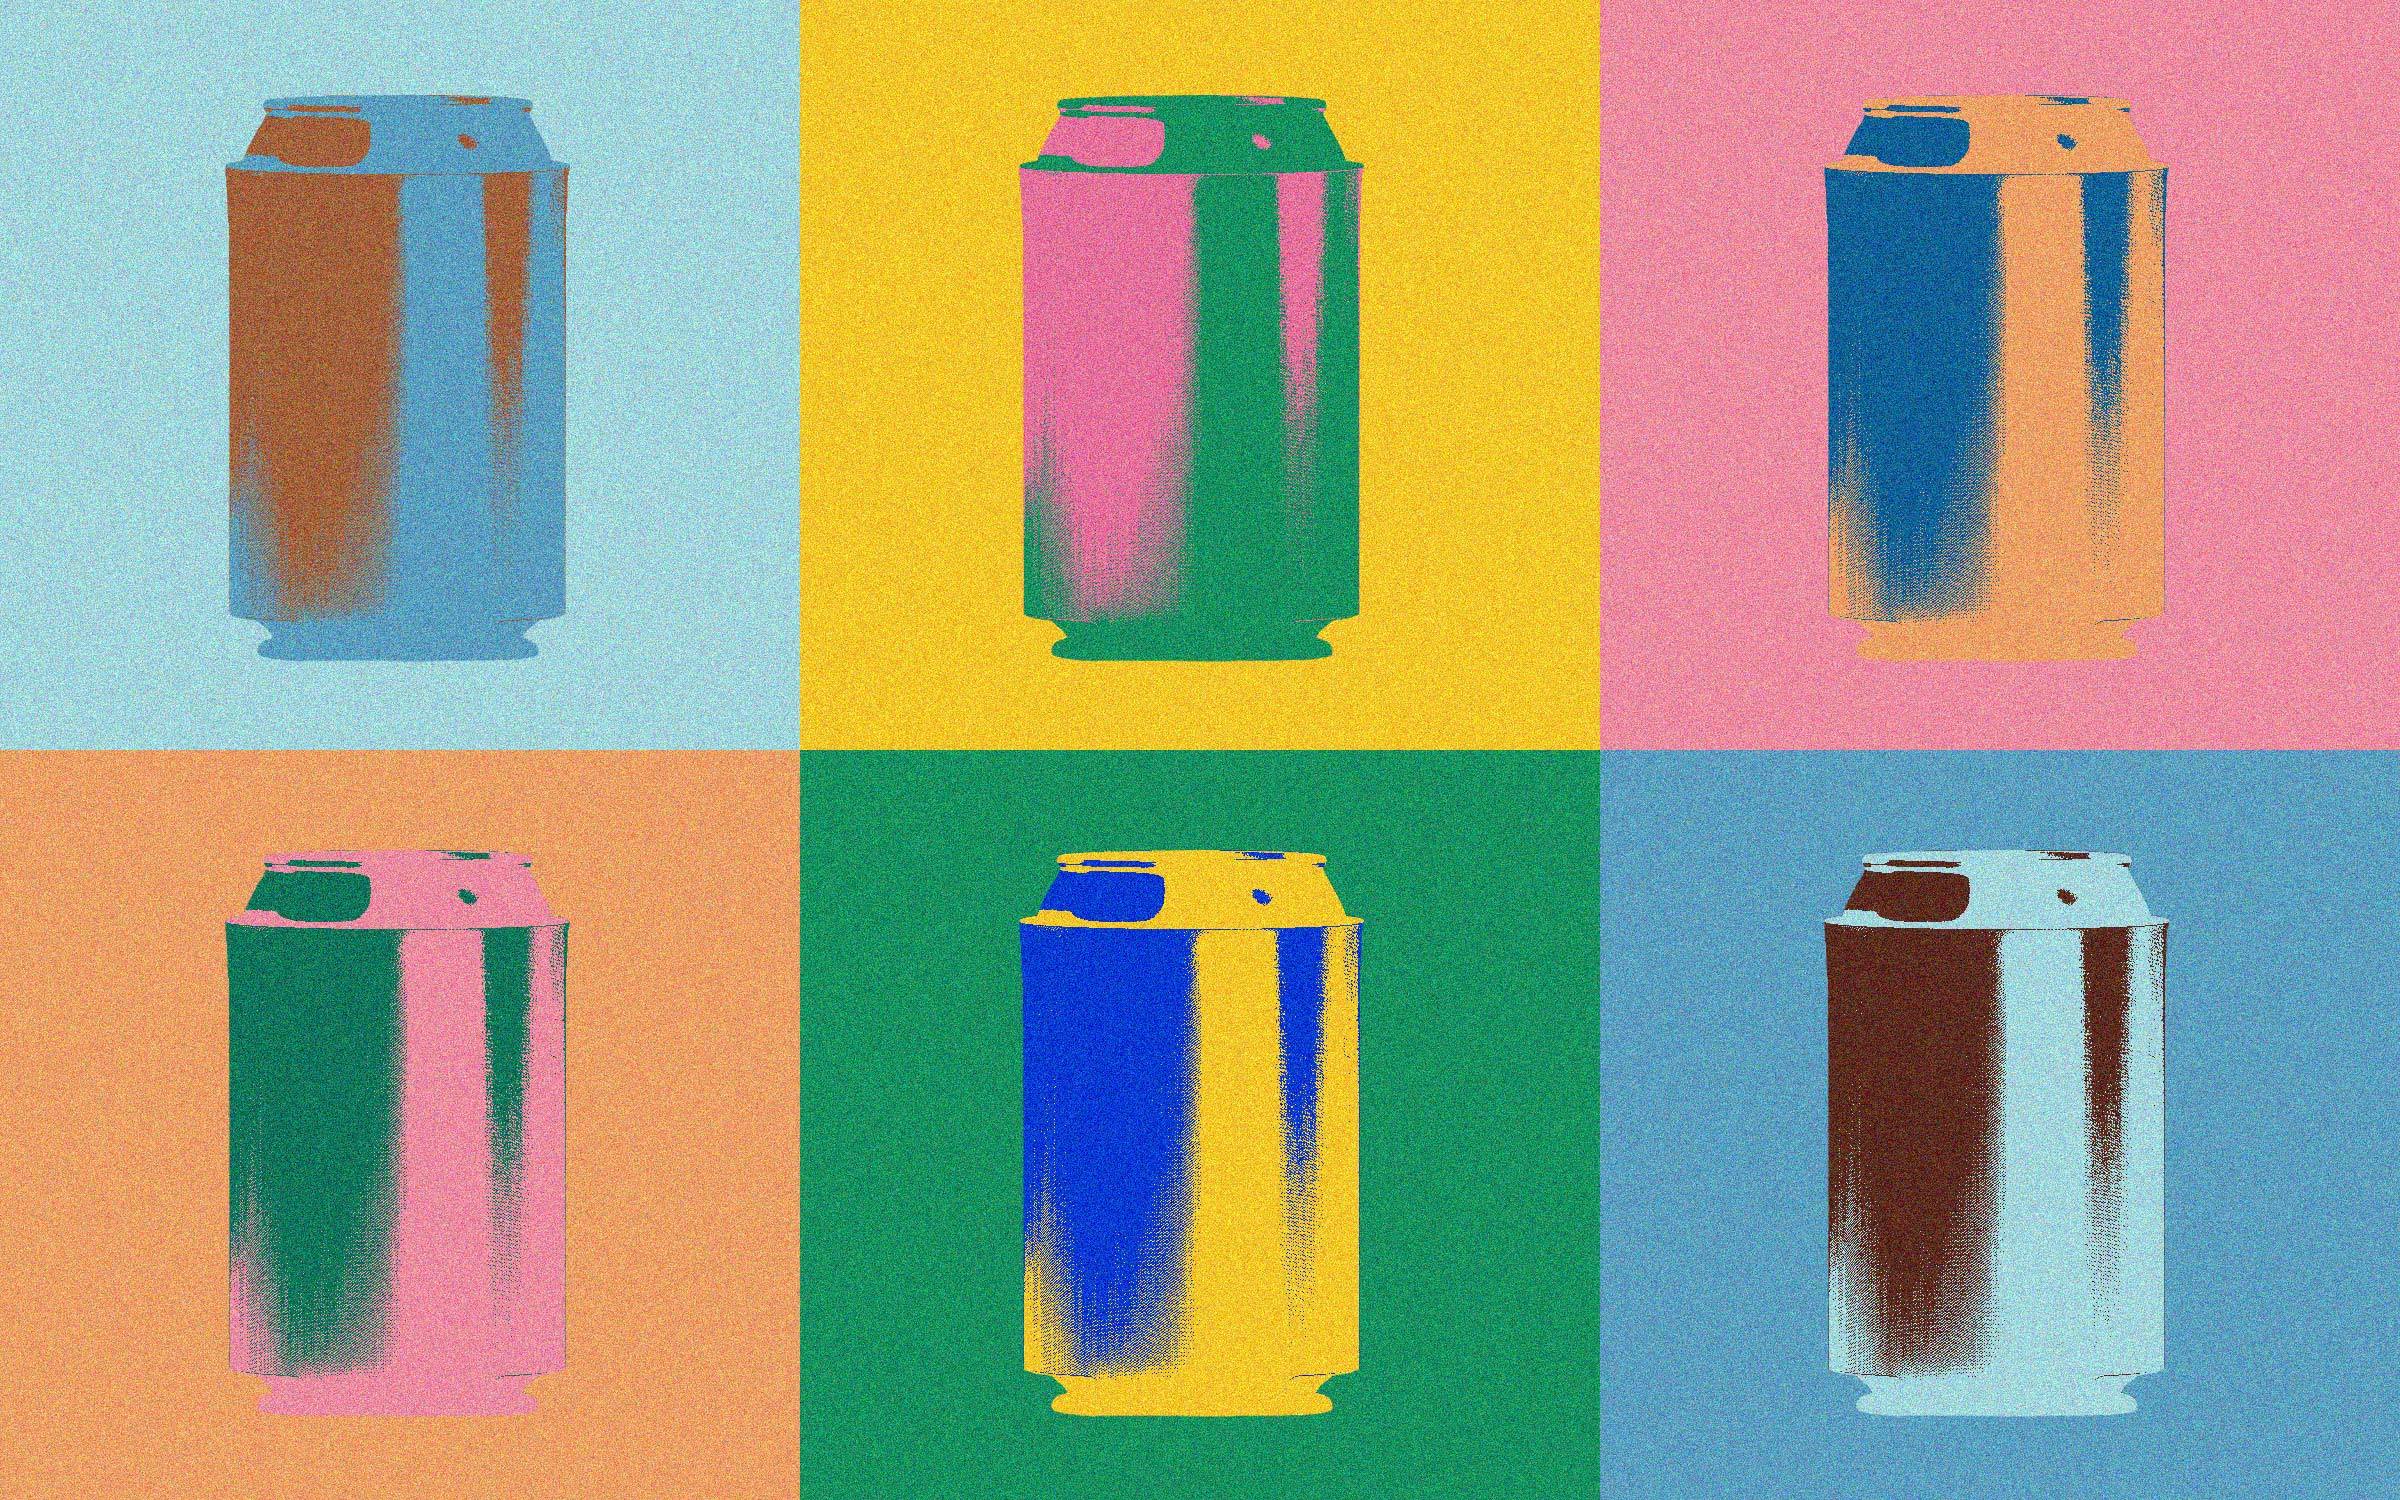 https://img.texasmonthly.com/2023/07/cultural-history-of-koozie.jpg?auto=compress&crop=faces&fit=fit&fm=pjpg&ixlib=php-3.3.1&q=45